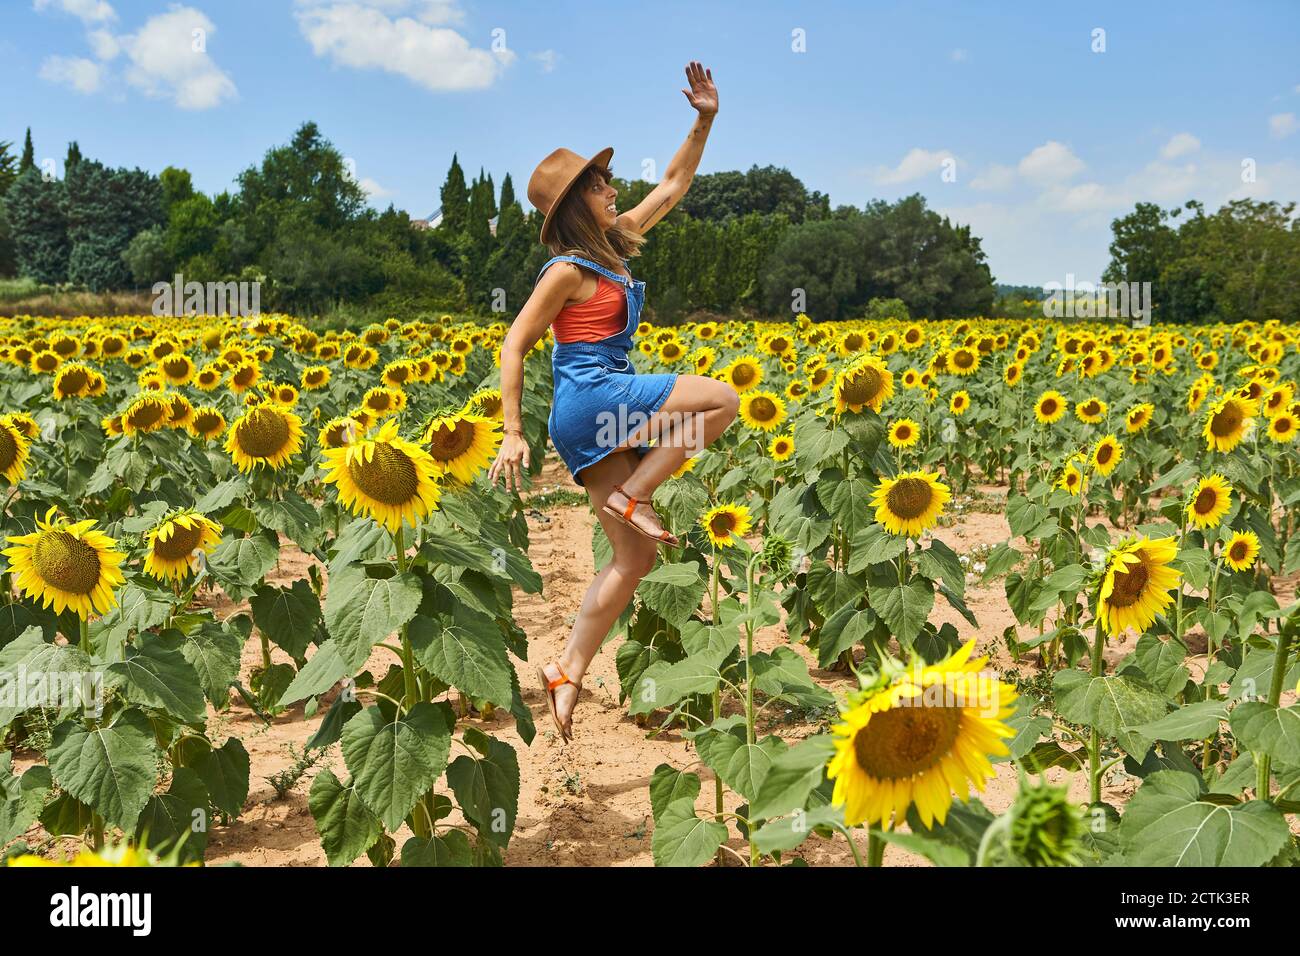 Smiling woman jumping in sunflower field during summer Stock Photo